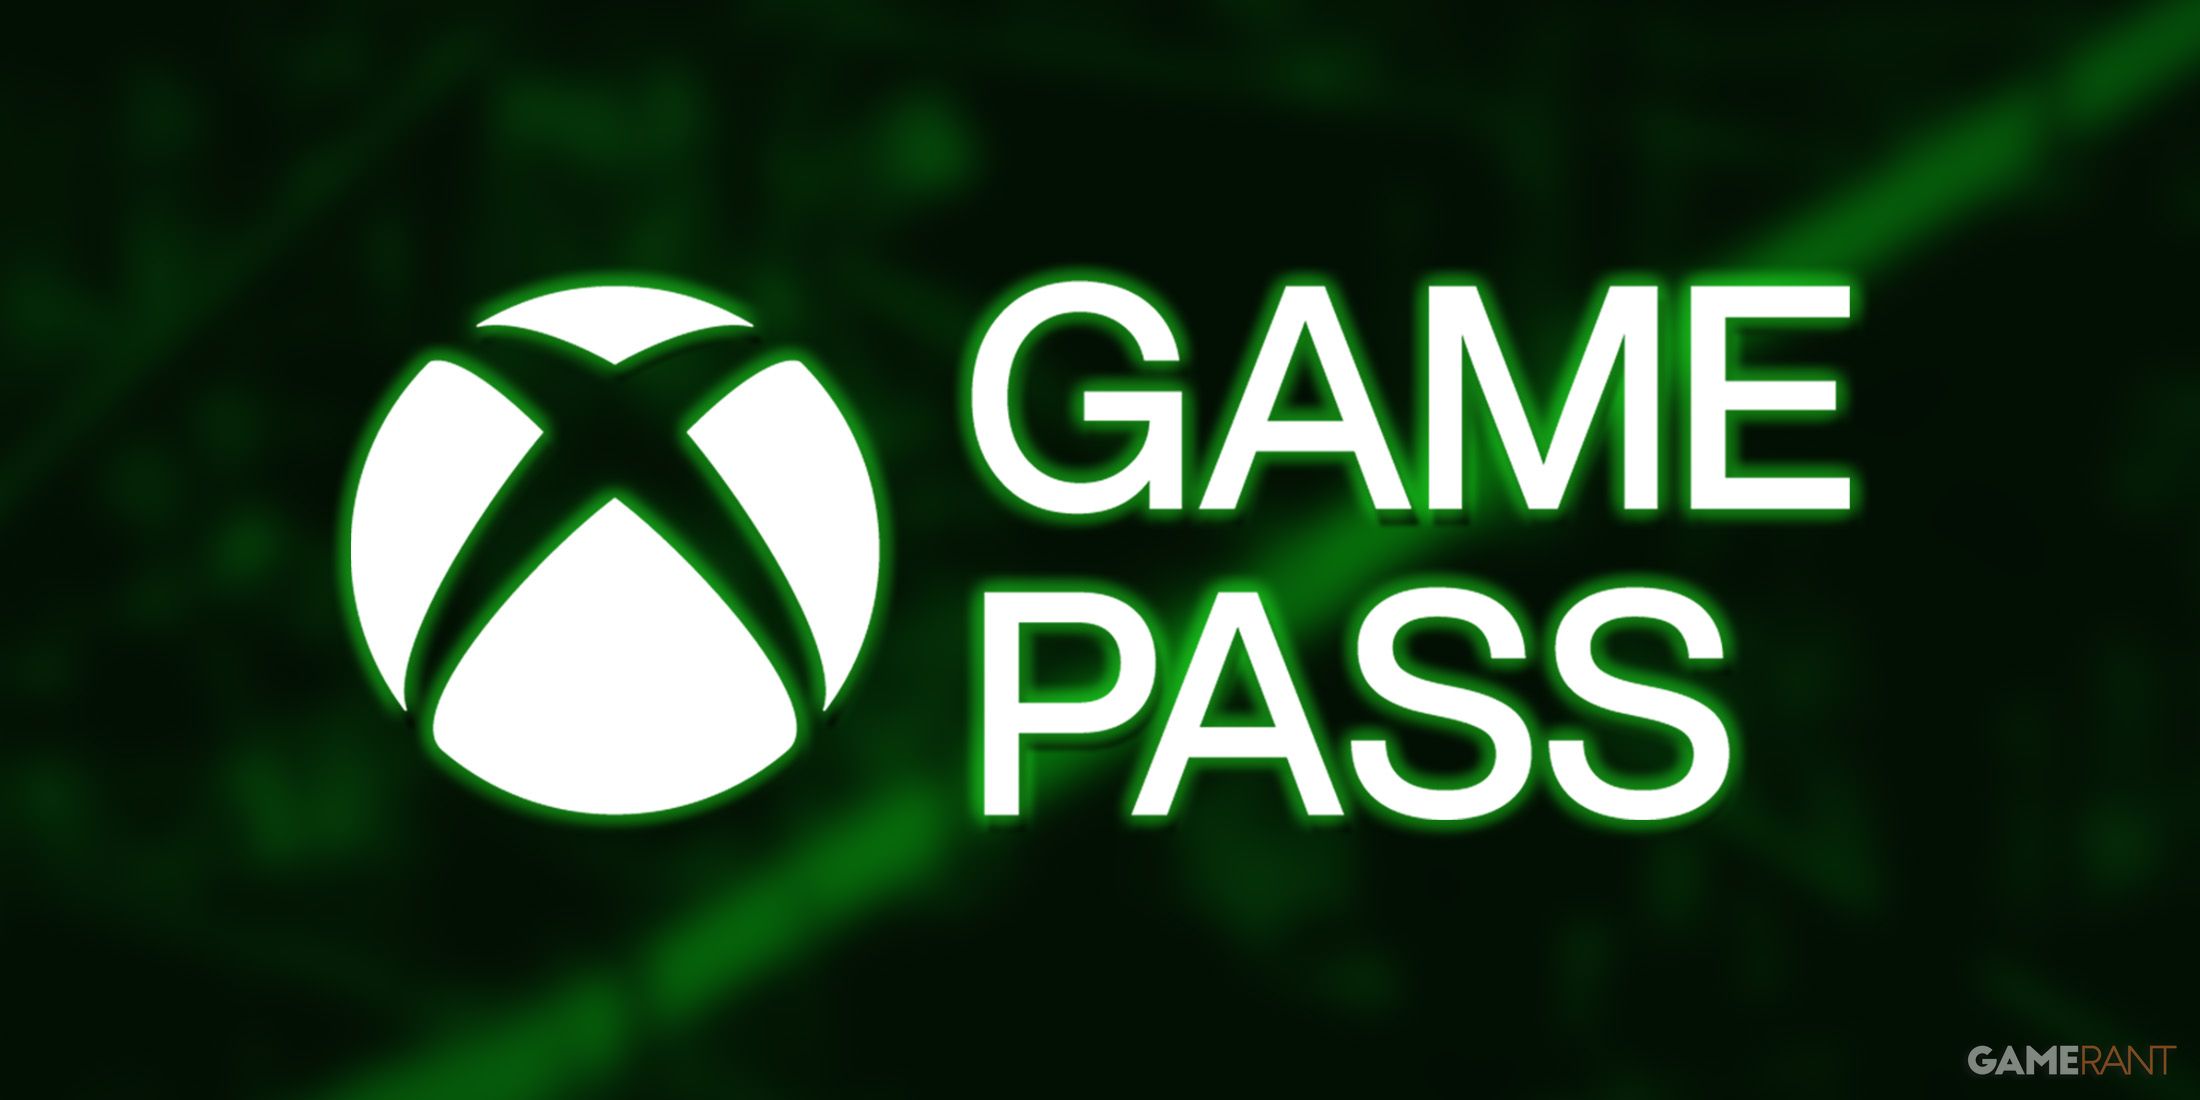 White abridged Xbox game pass logo on blurred Hauntii screenshot with green multiply filter